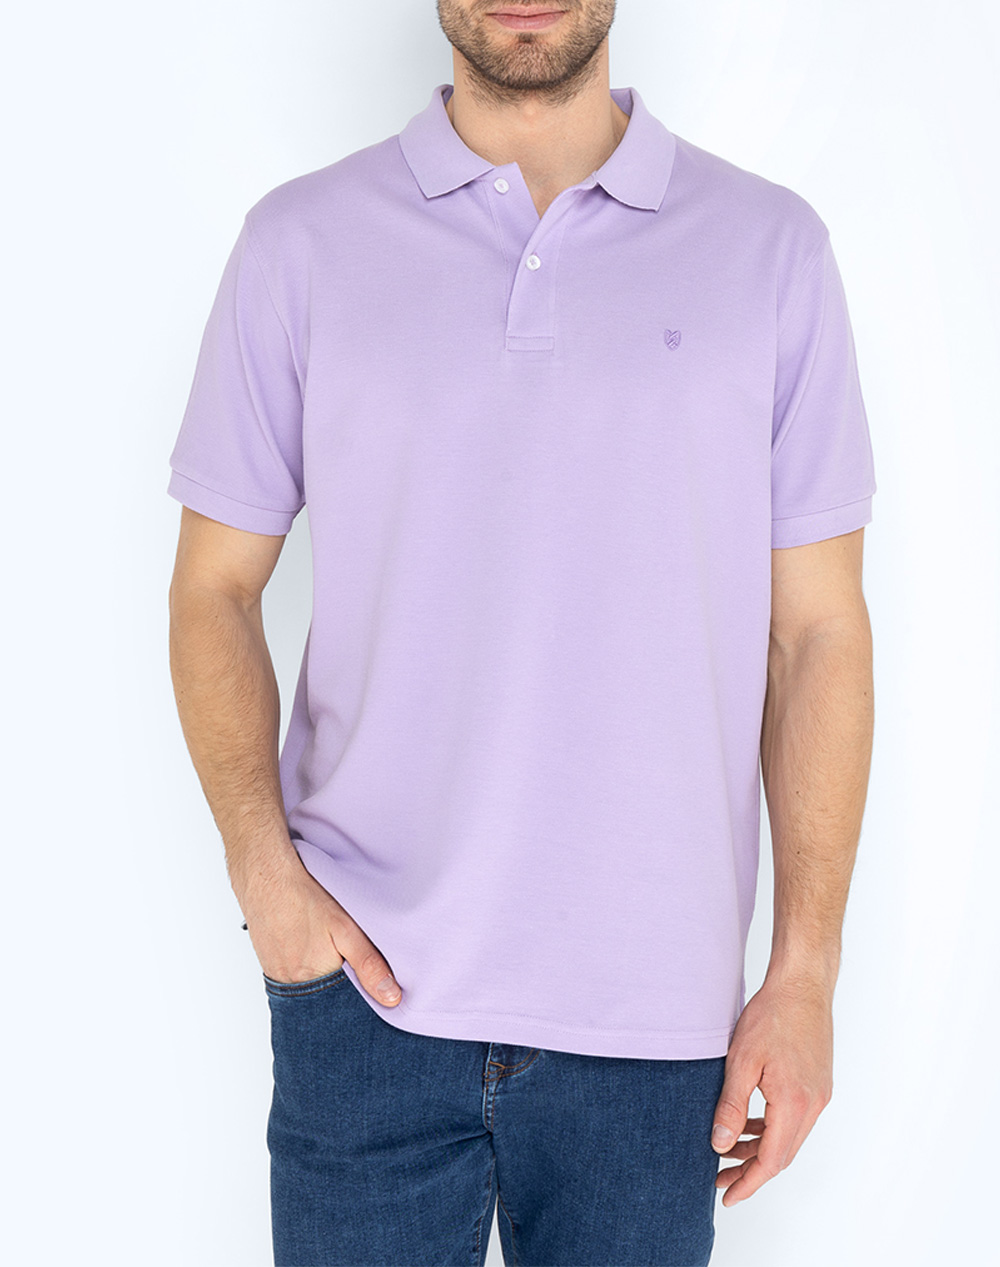 THE BOSTONIANS ΜΠΛΟΥΖΑ POLO PIQUE REGULAR FIT 3PS0001-LILAC Lilac 3820ABOST3410092_90880